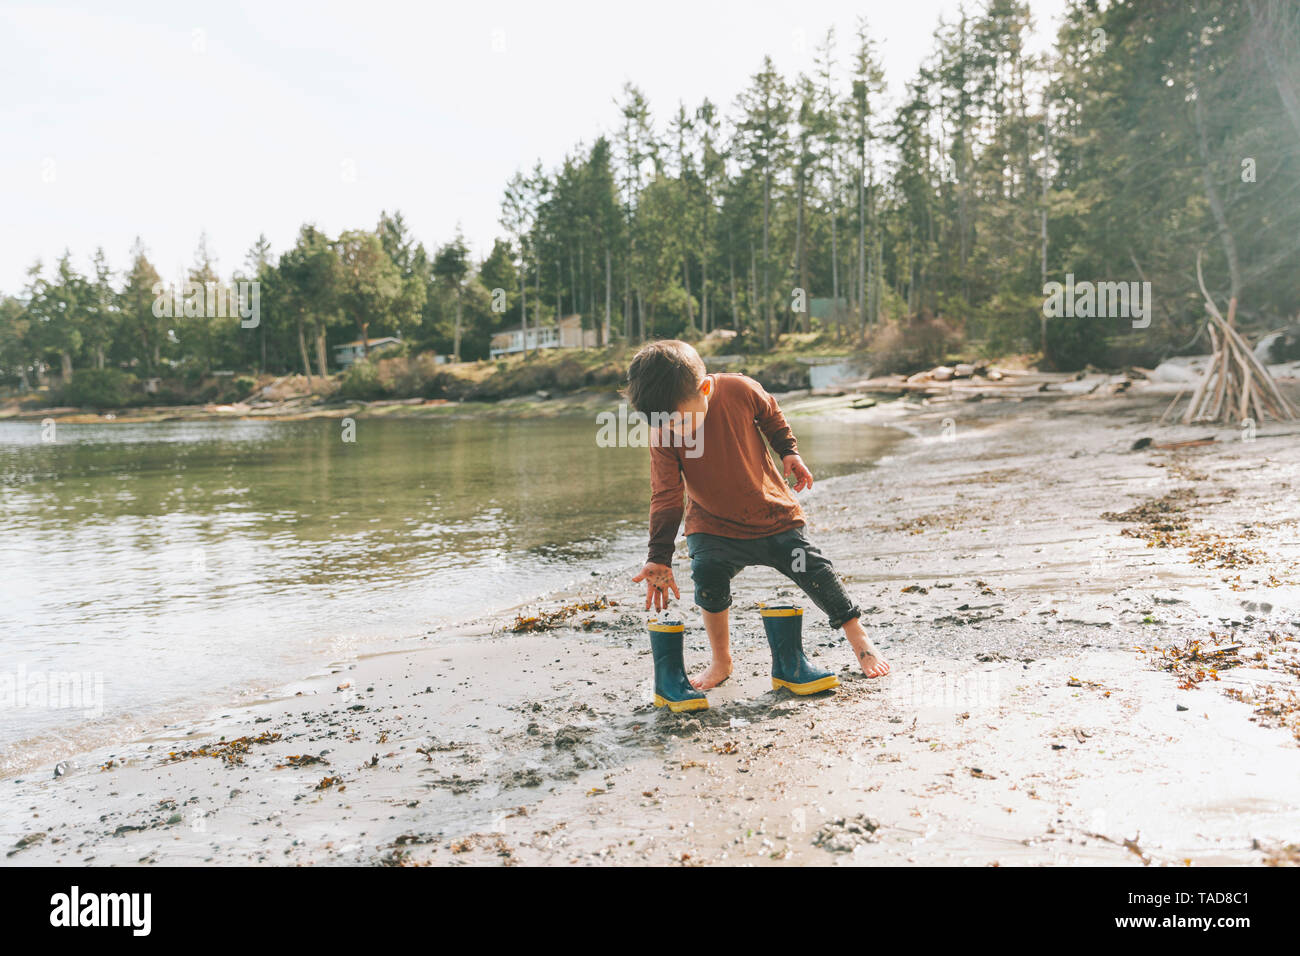 Boy playing on a the beach, walking barefoot in the mud Stock Photo